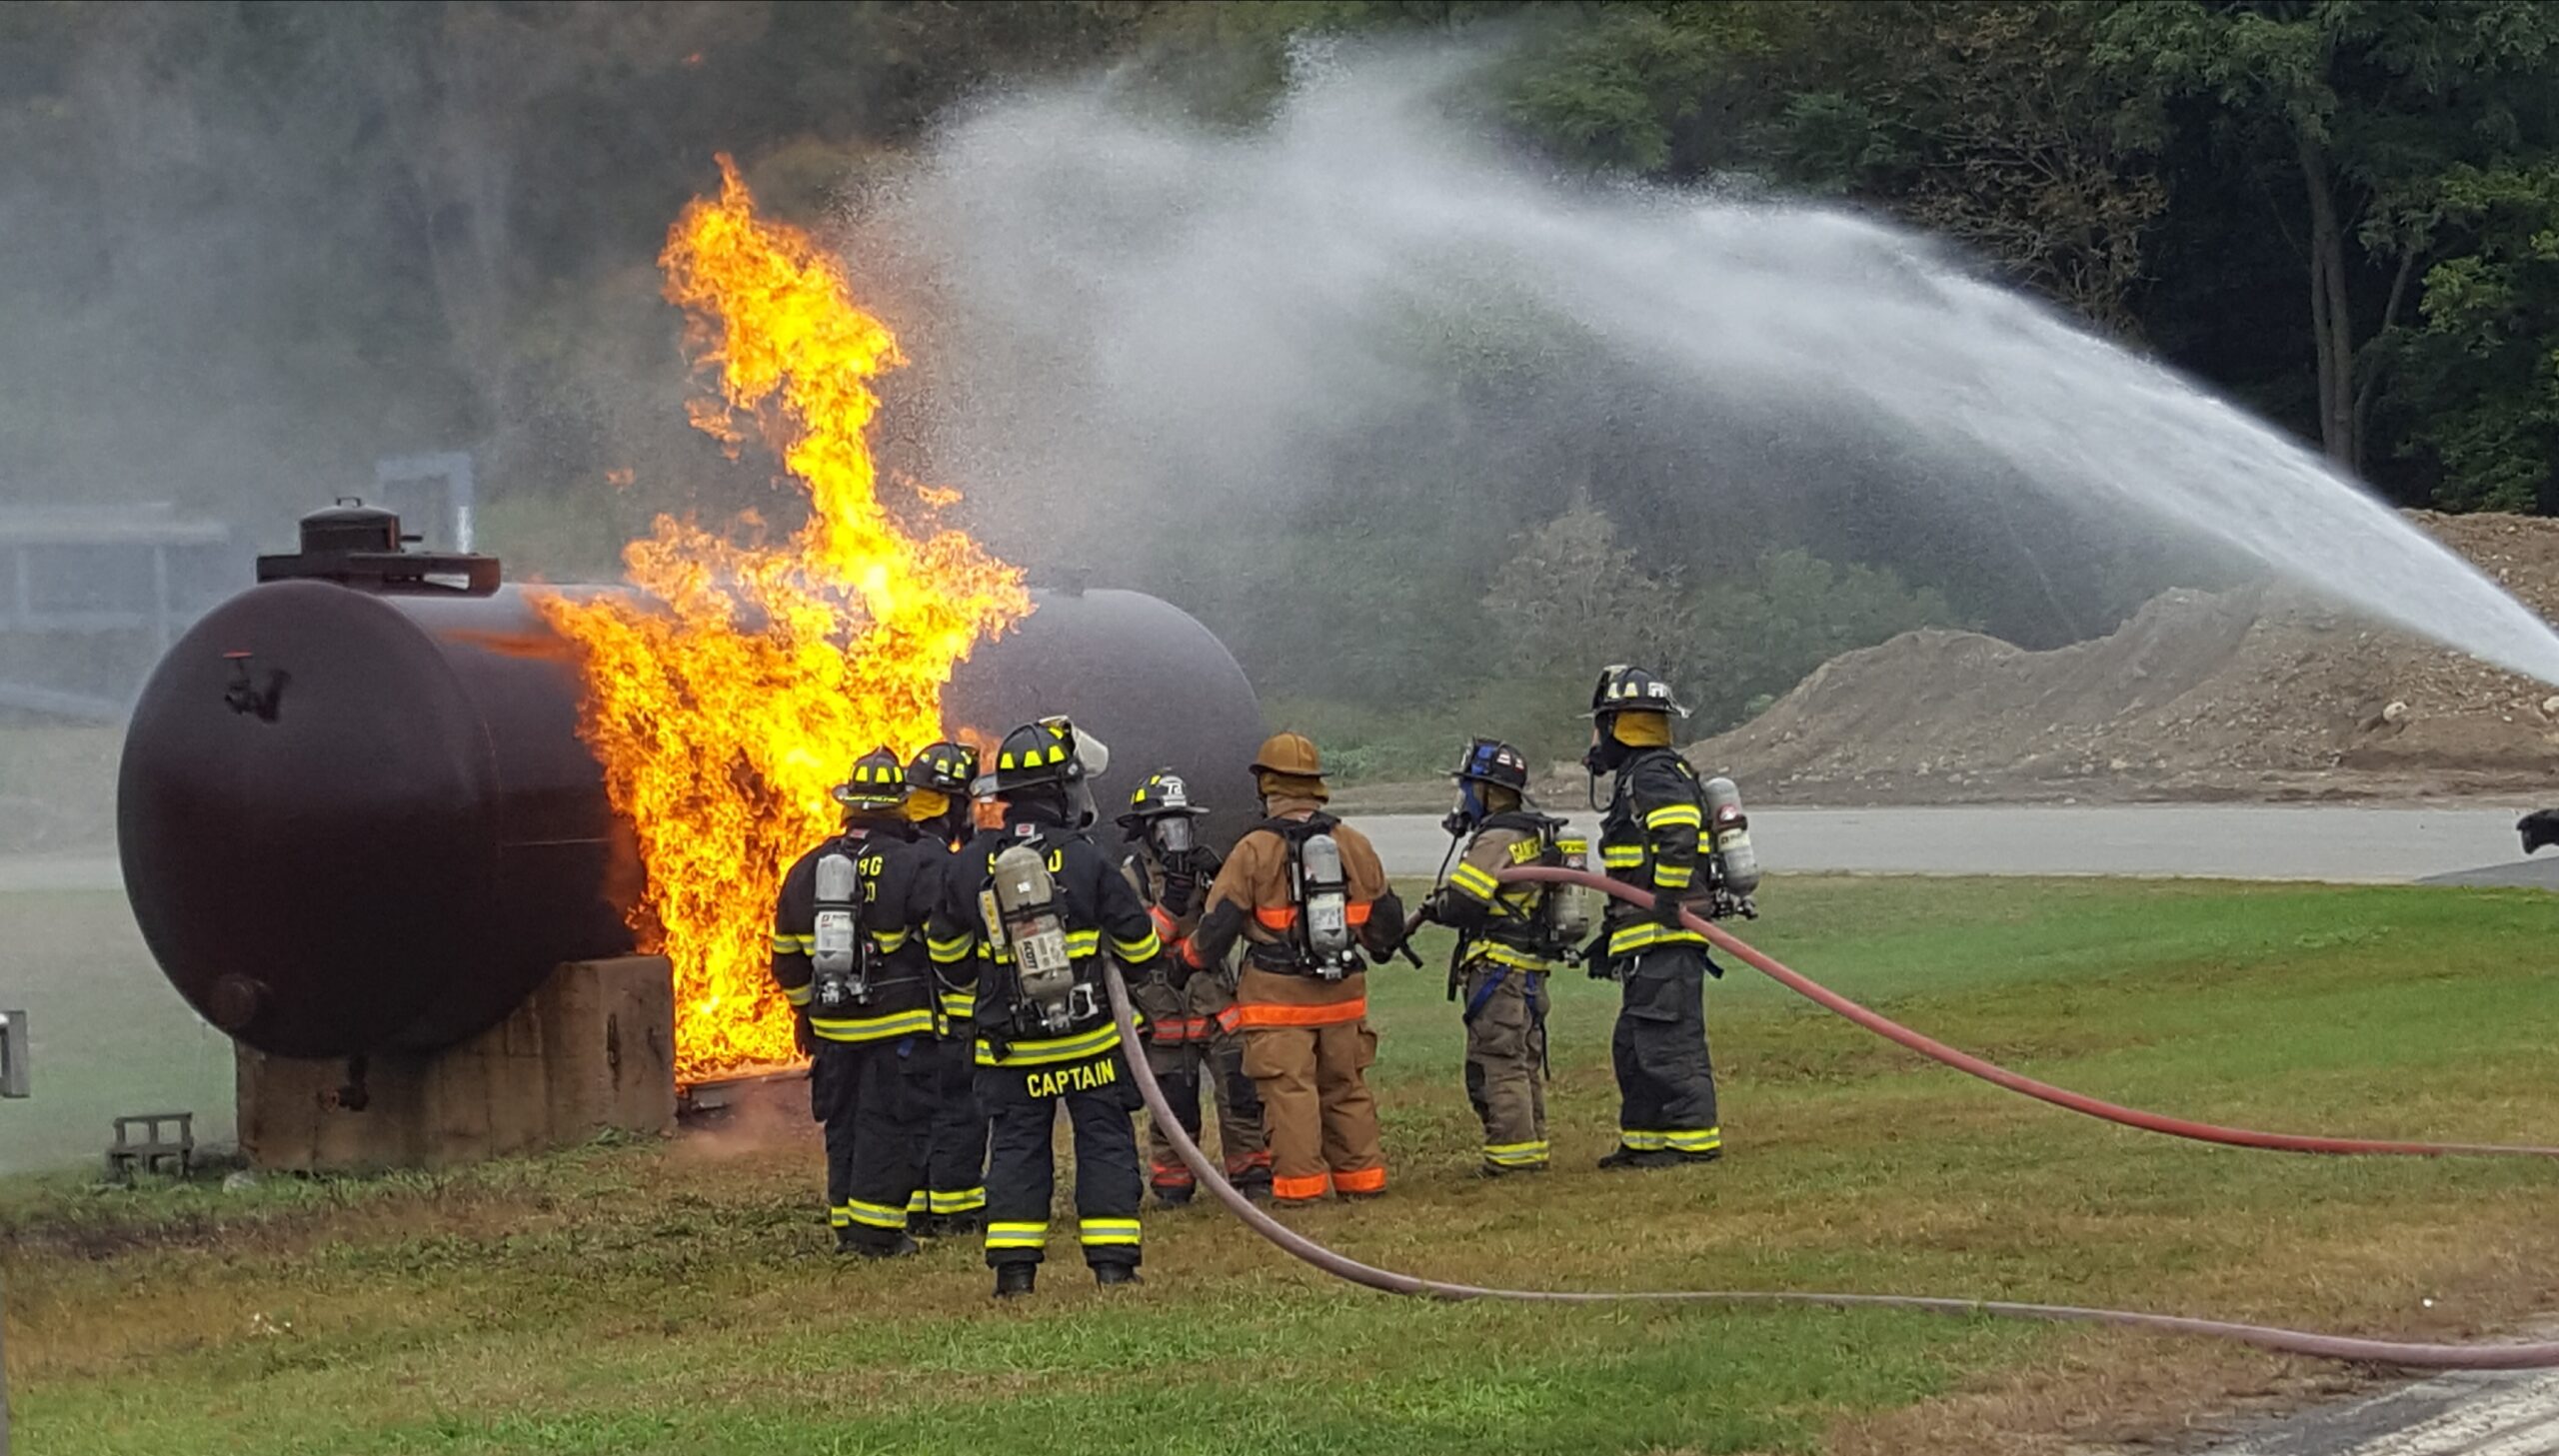 firefighters extinguishing a propane tank fire